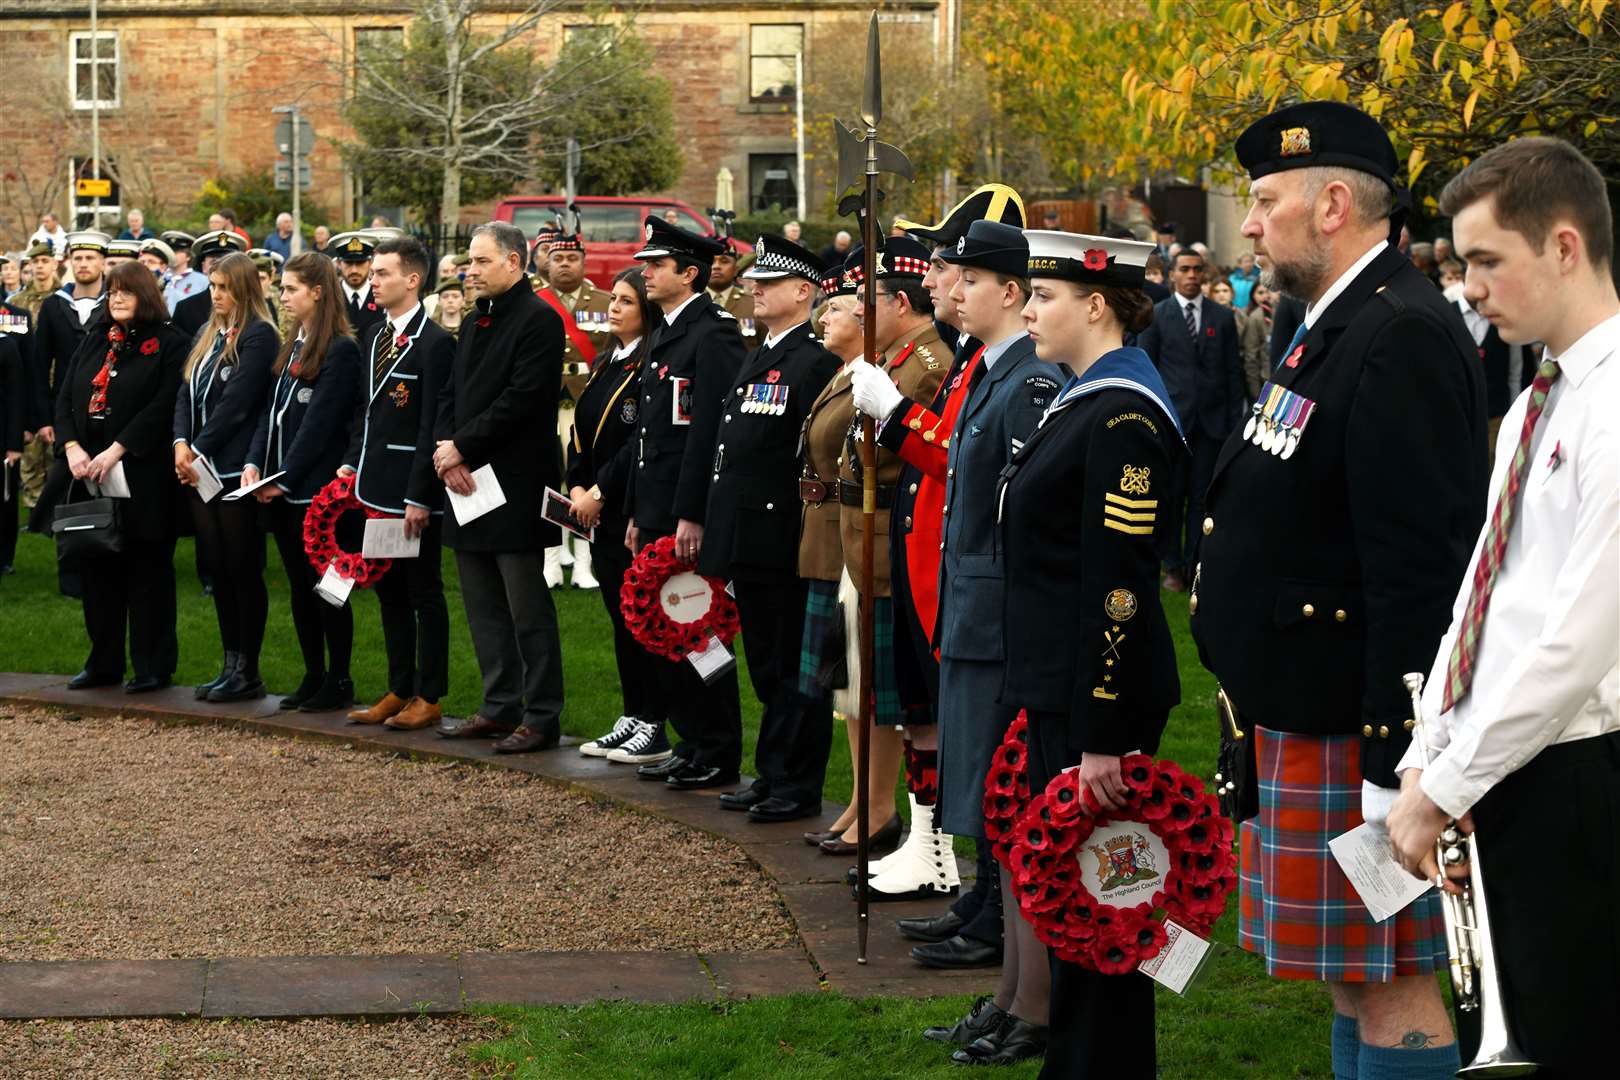 A moment of silence during the Remembrance Sunday service at Cavell Gardens war memorial in Inverness. Pictures: James Mackenzie.